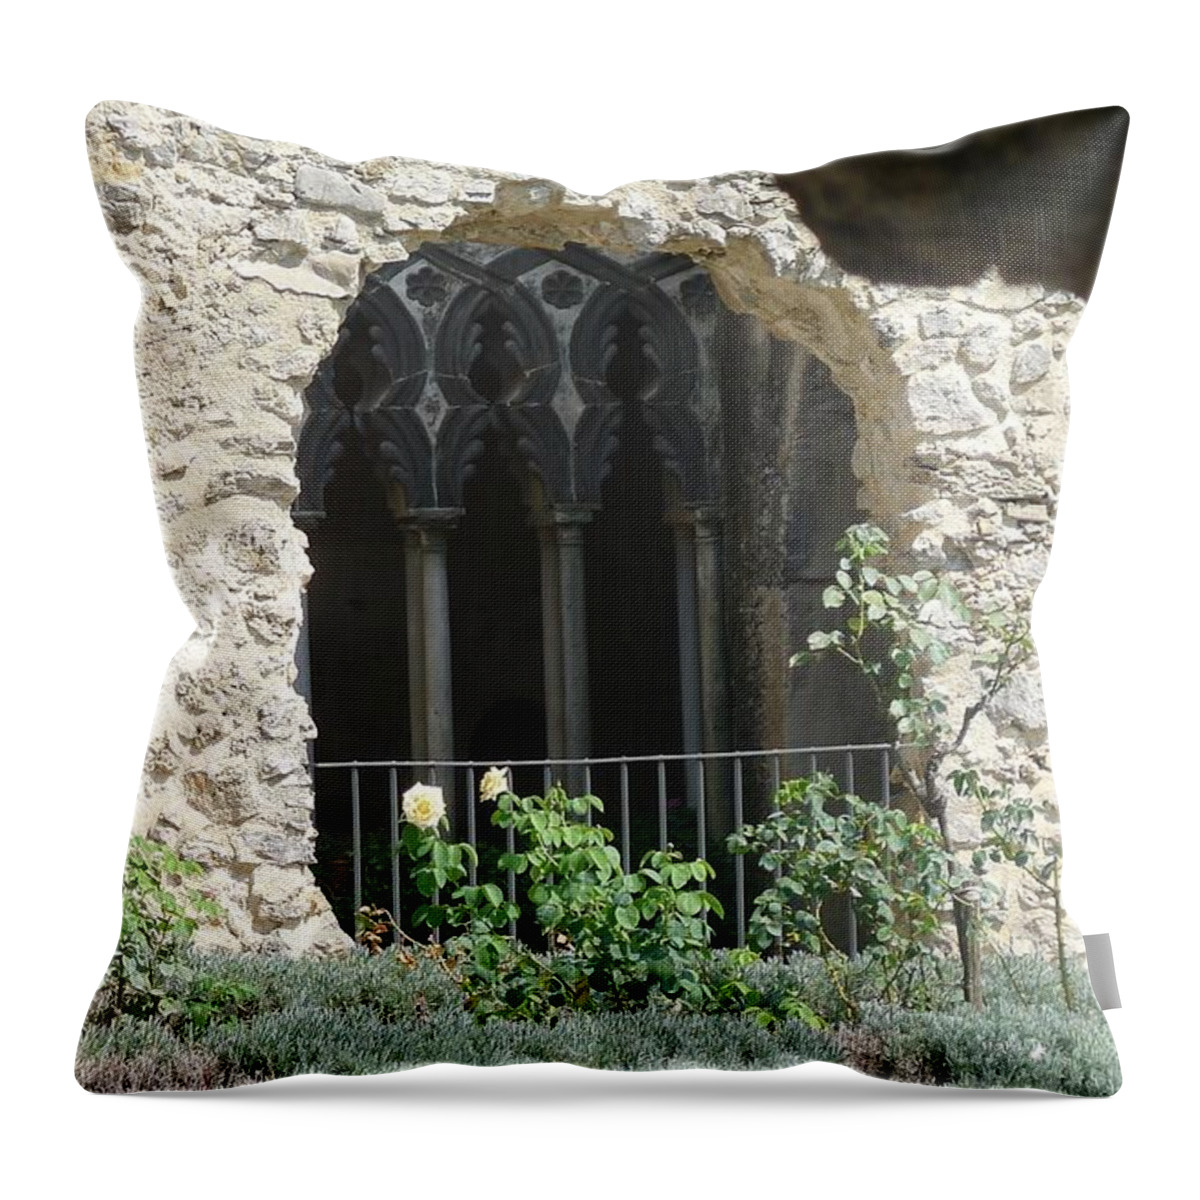  Throw Pillow featuring the photograph Rough Arches by Nora Boghossian